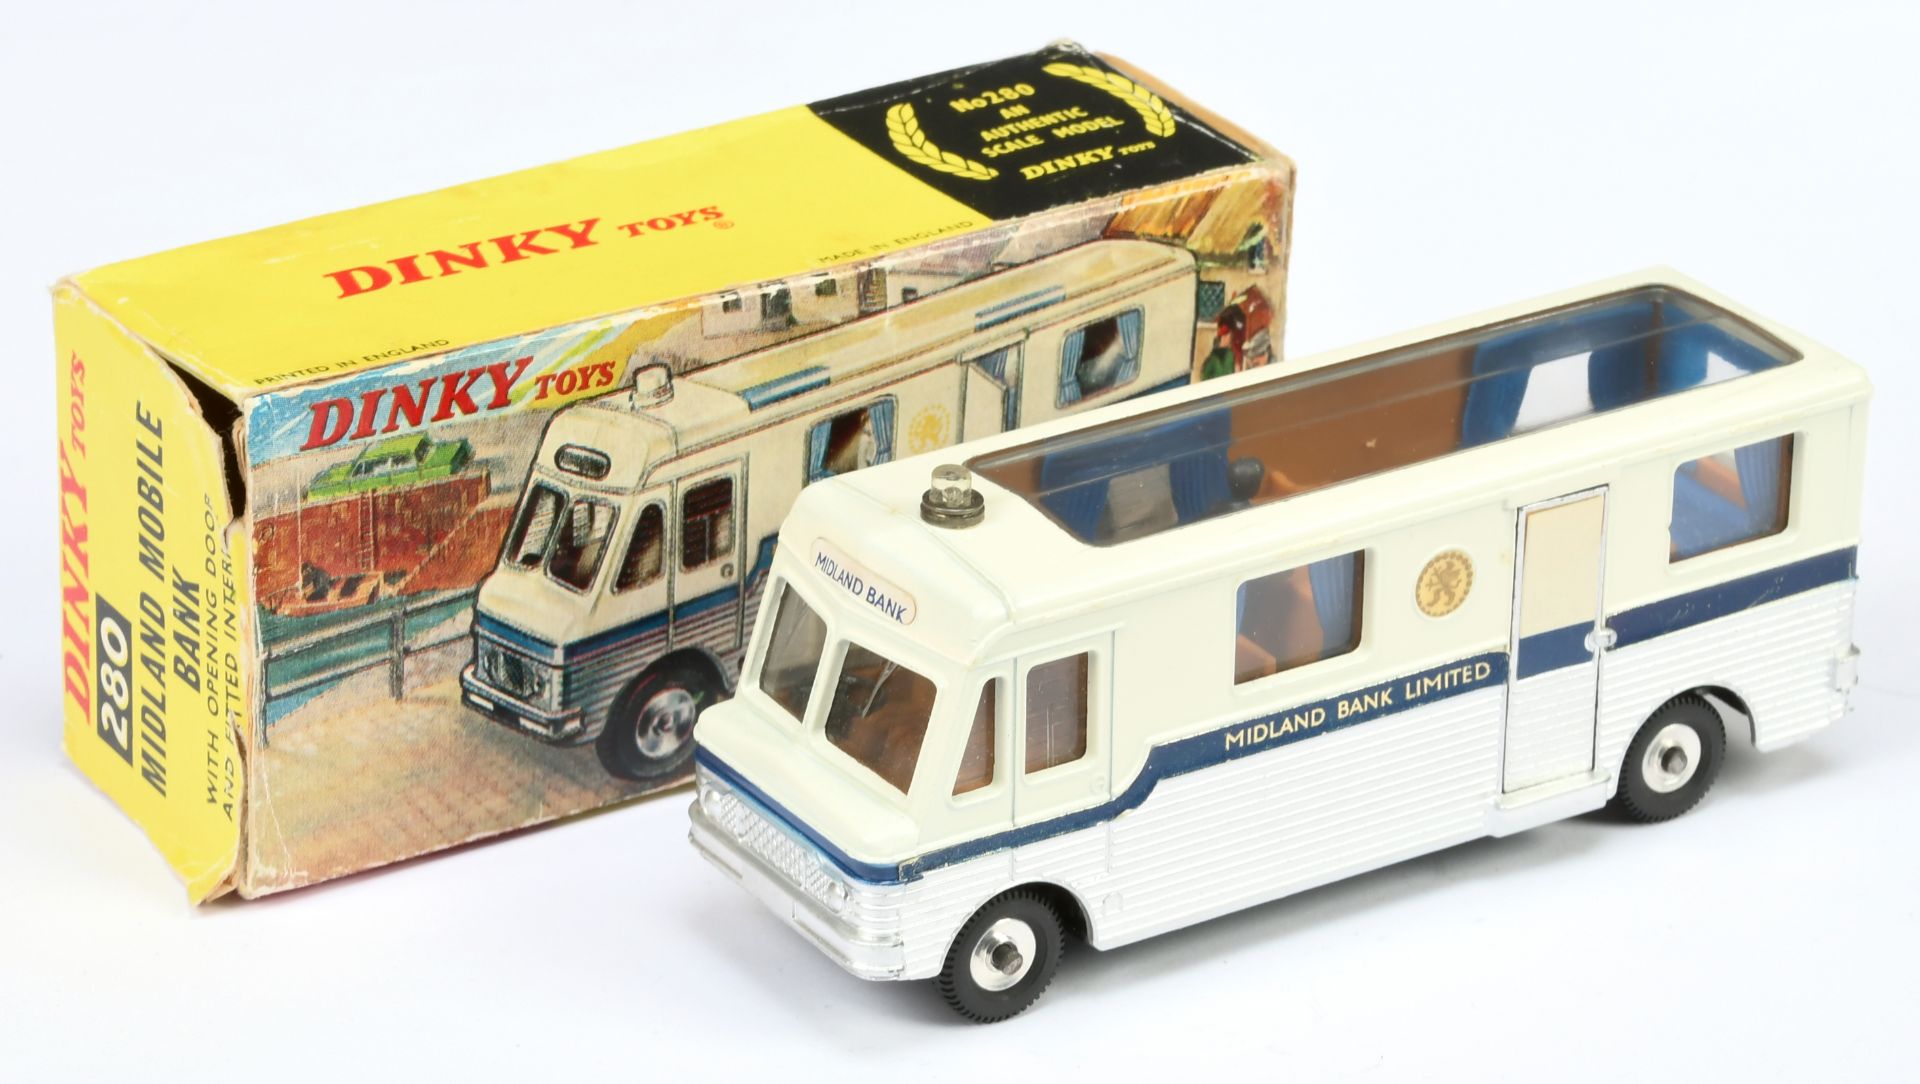 Dinky Toys 280 Midland Mobile Bank - Two-Tone Off white over silver, blue trim, spun hubs - Excel...